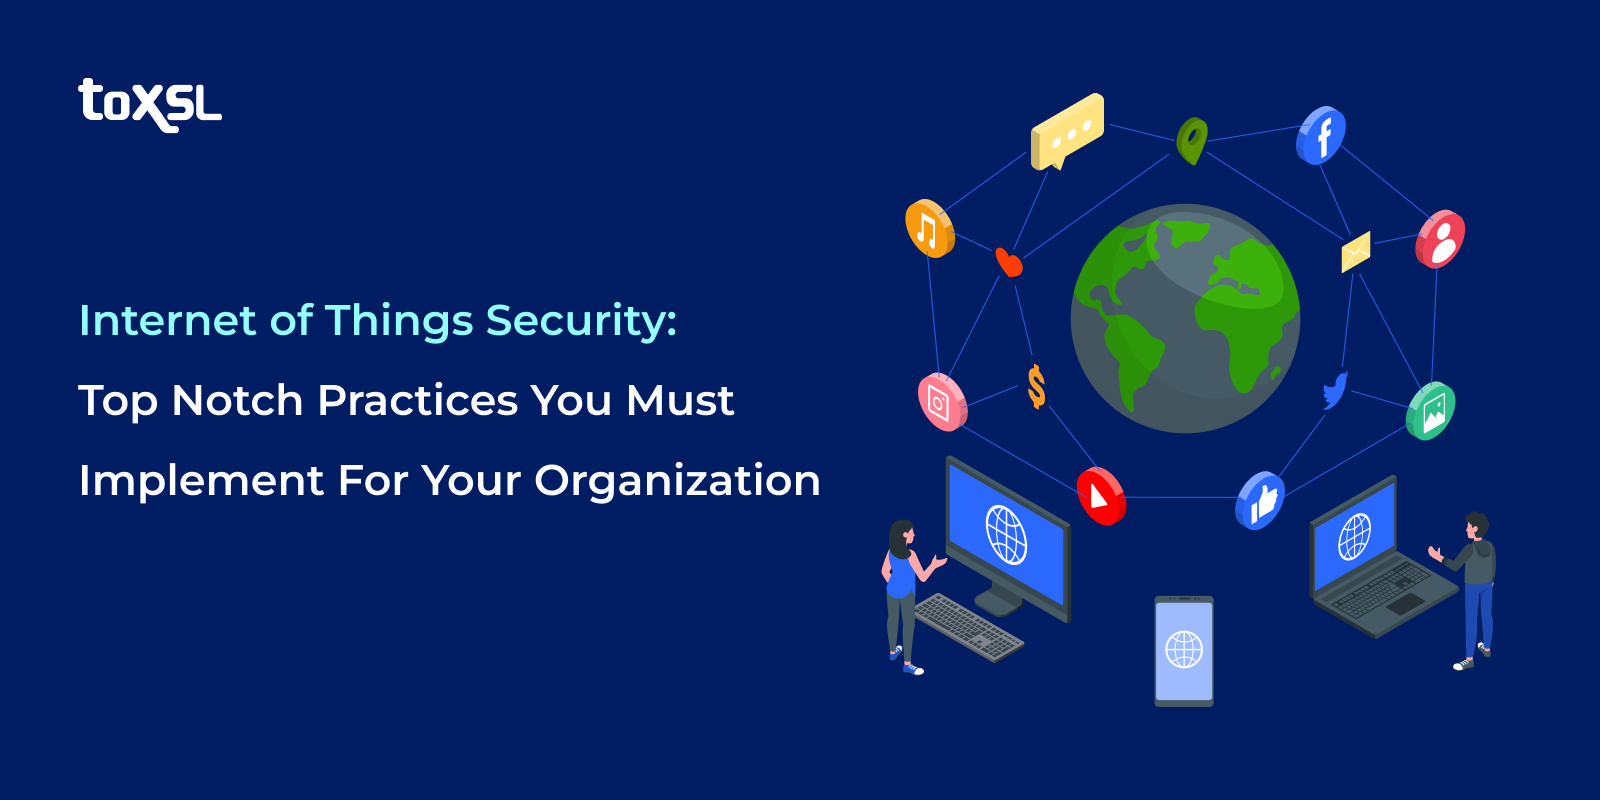 Internet of Things Security: Top Notch Practices You Must Implement For Your Organization